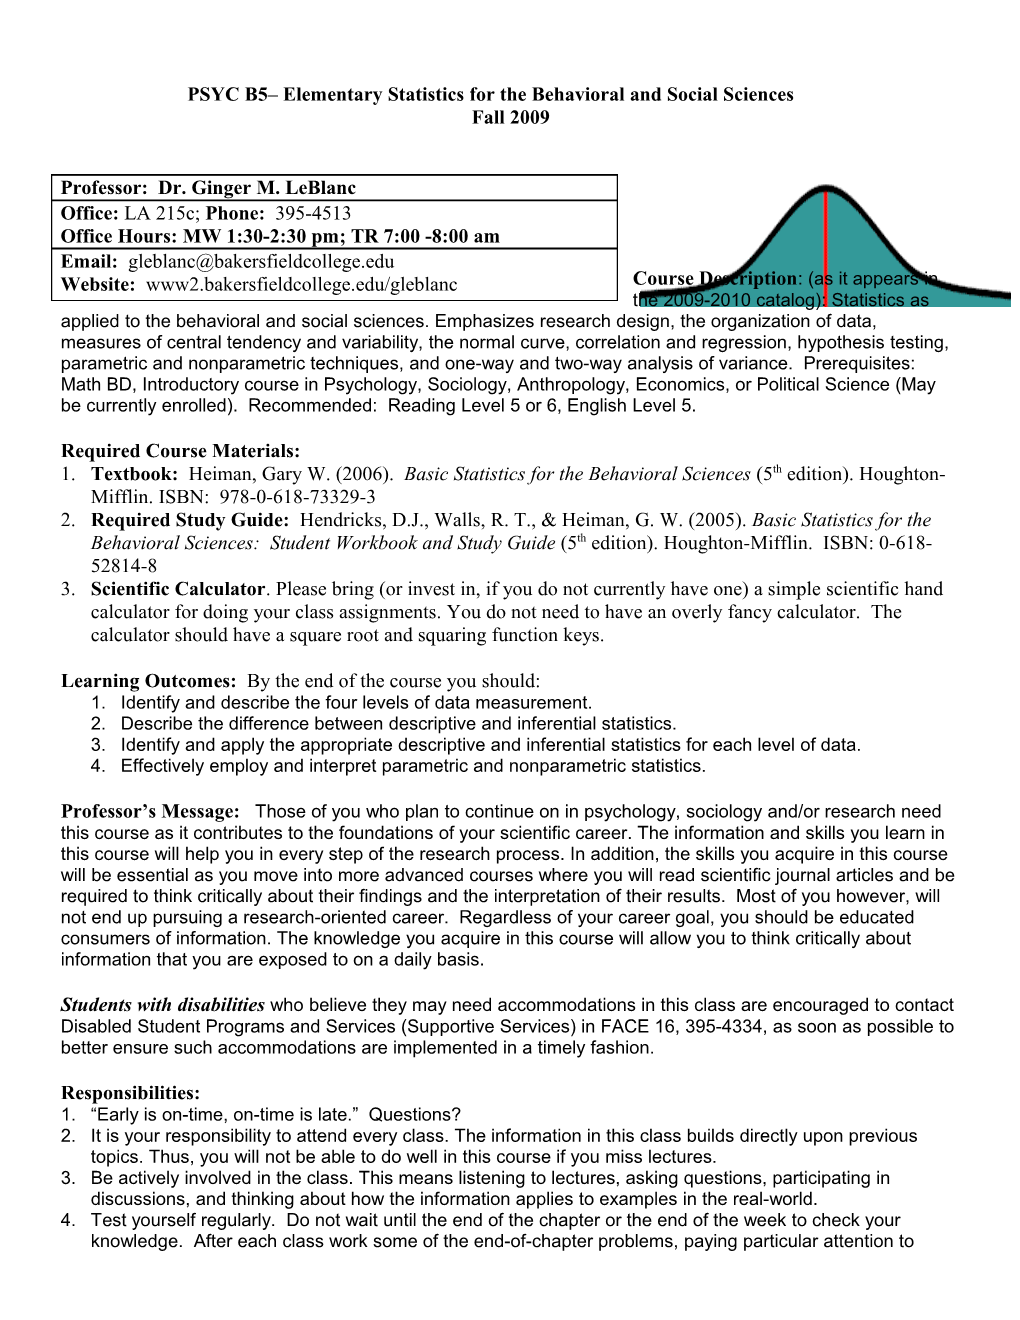 PSYC 5 Statistics for the Behavioral and Social Sciences